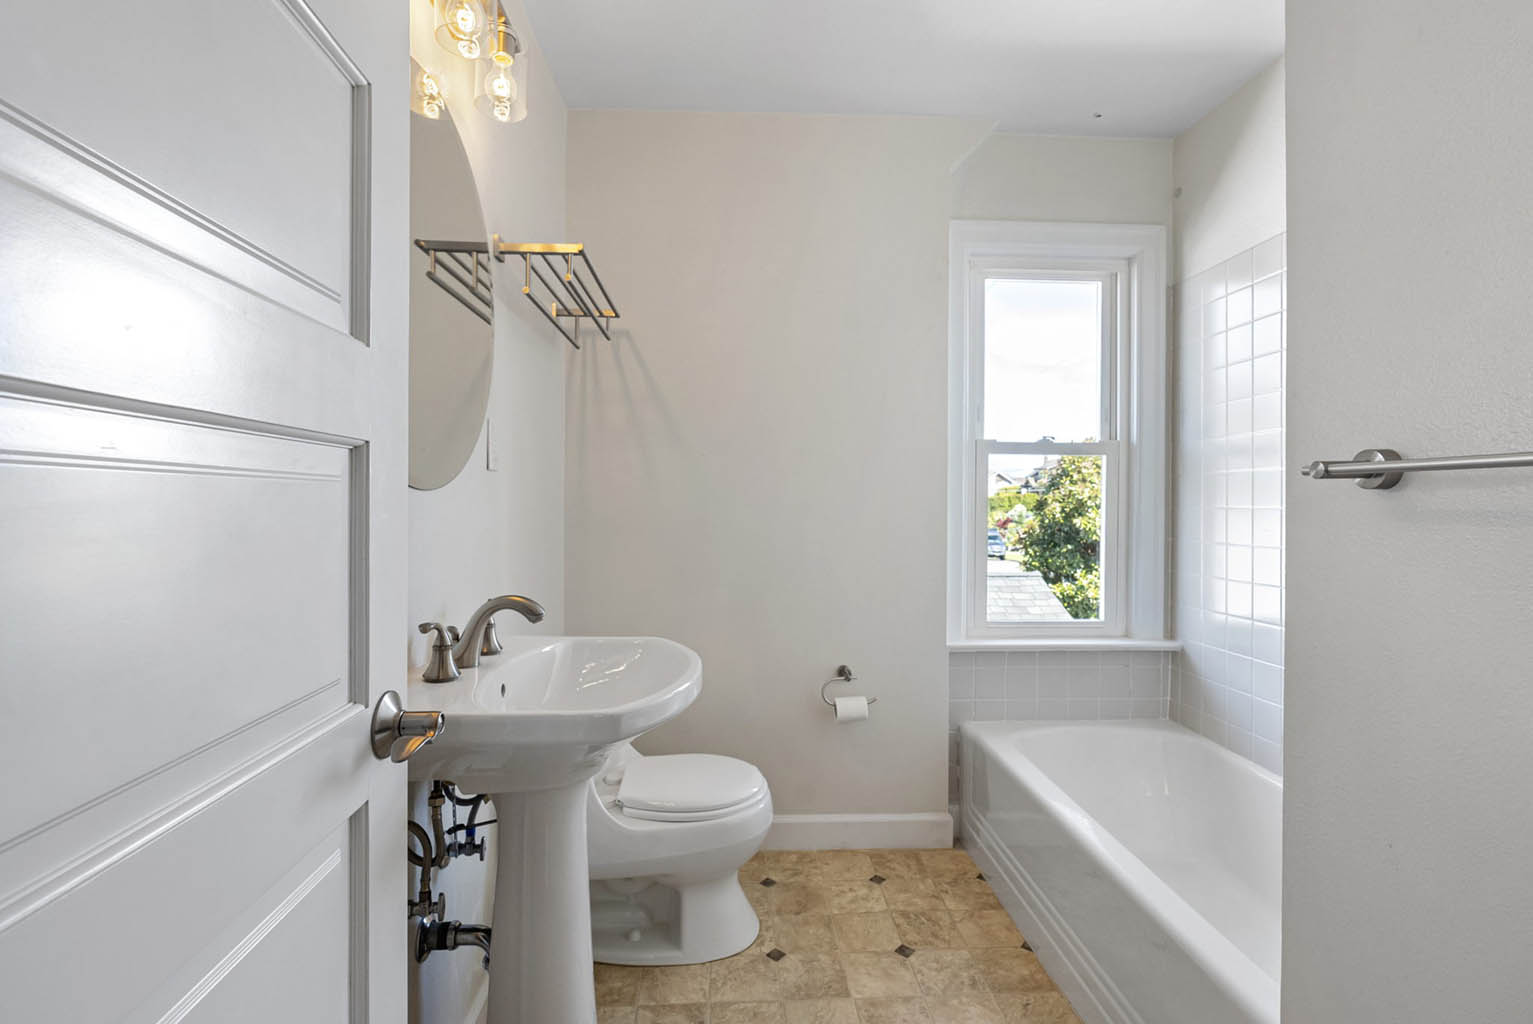 Hall bathroom with tub and shower